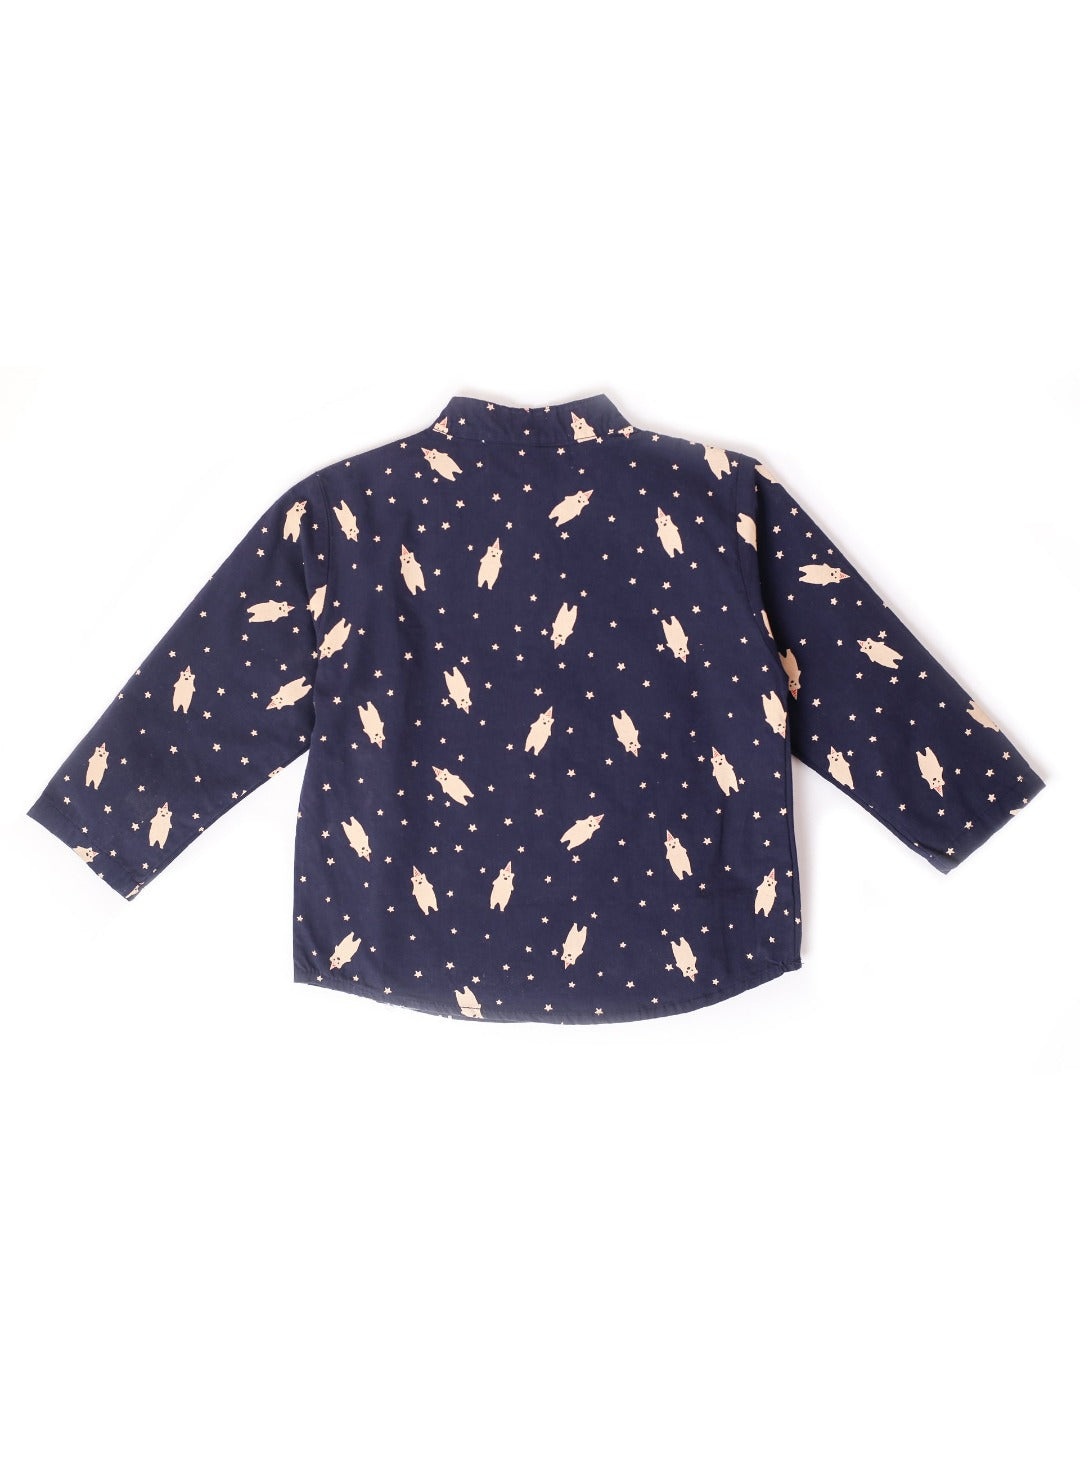 navy blue shirt with bears and stars print